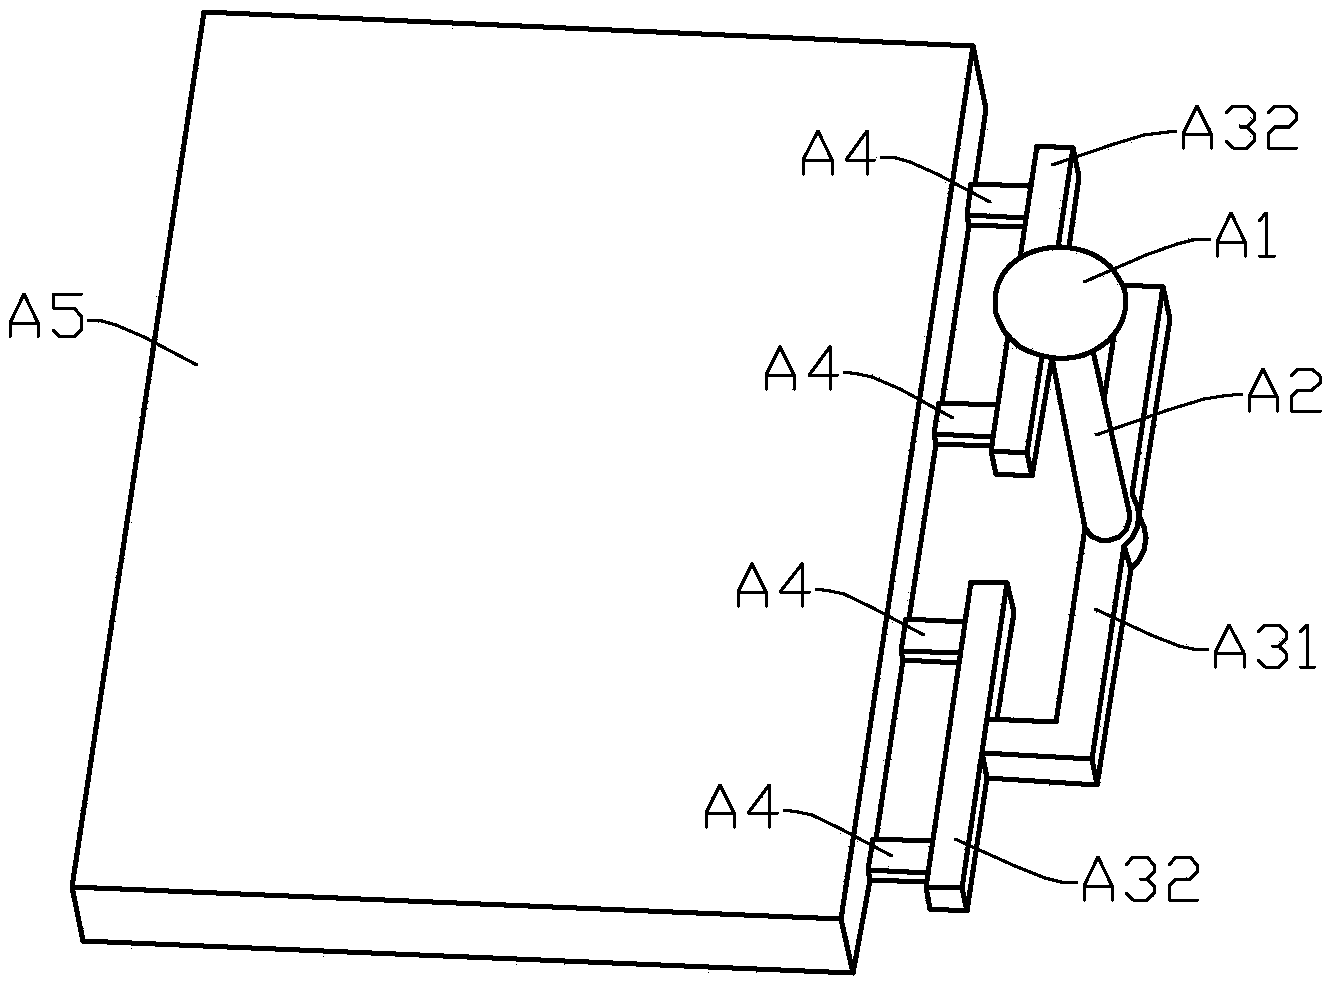 Gating system with multistage split transverse runners